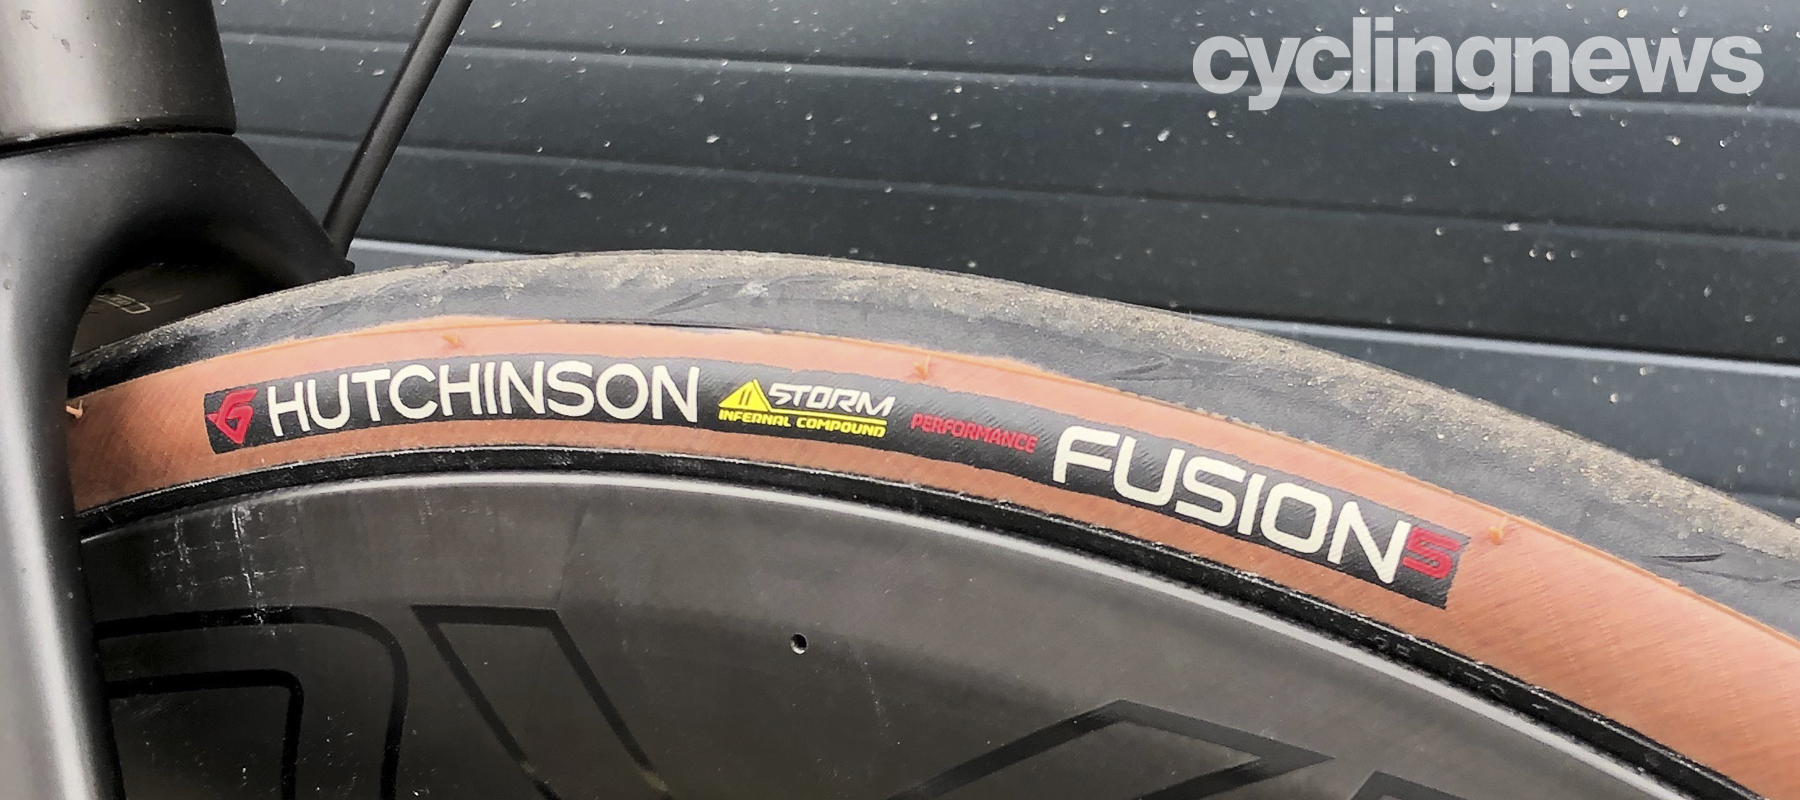 Hutchinson Fusion 5 Performance 11Storm Road Cycle Bike Tyre 